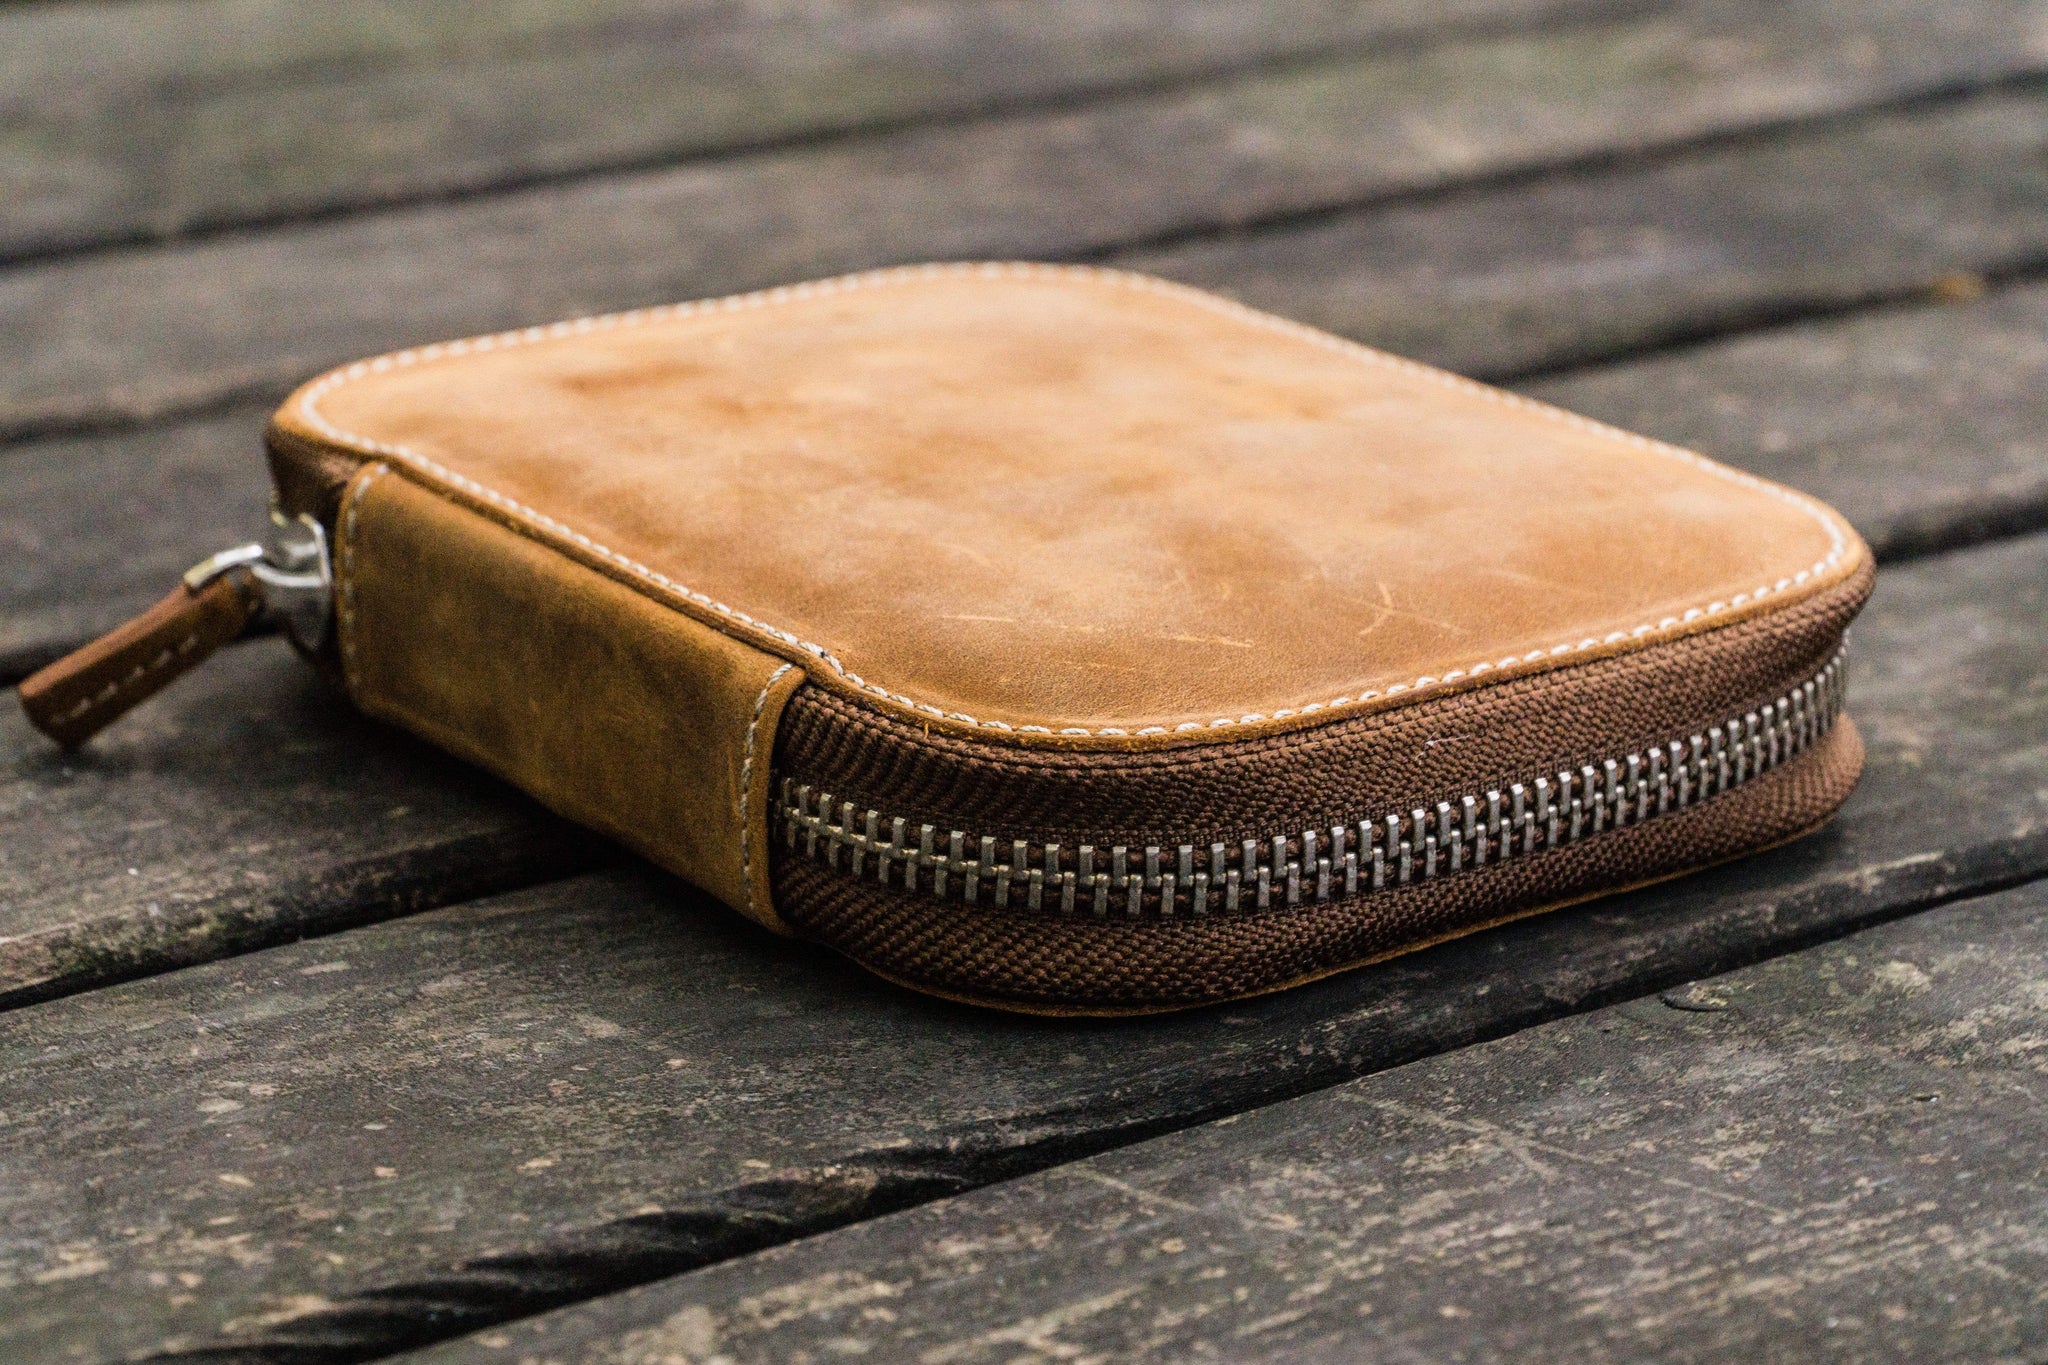 Leather Zippered Small Pencil Pouch/Case - Brown - Galen Leather